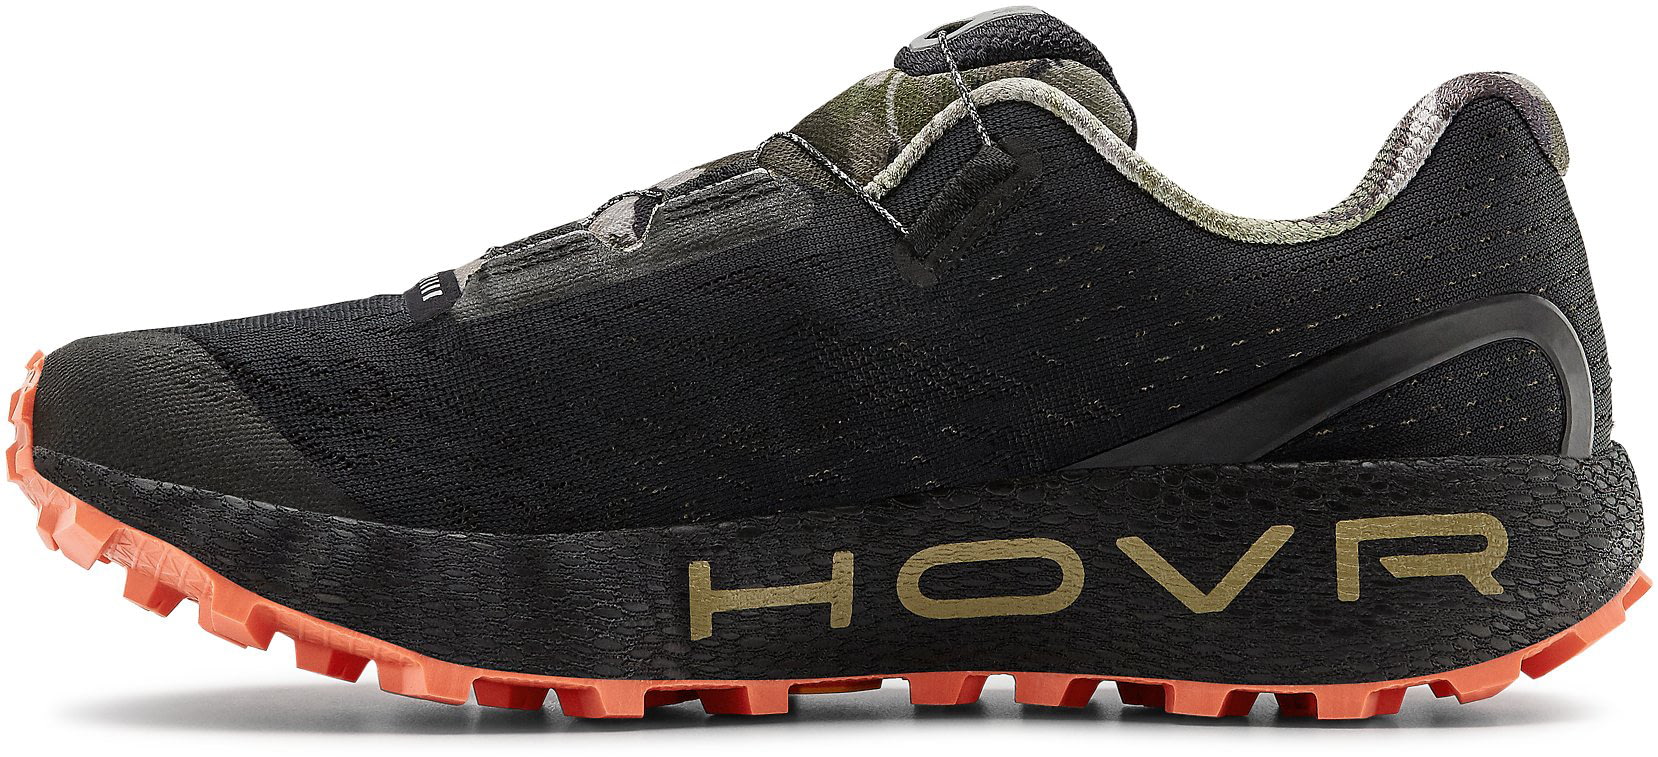 Under Armour HOVR Machina Off Road CH1 - Men's | w/ Free Shipping